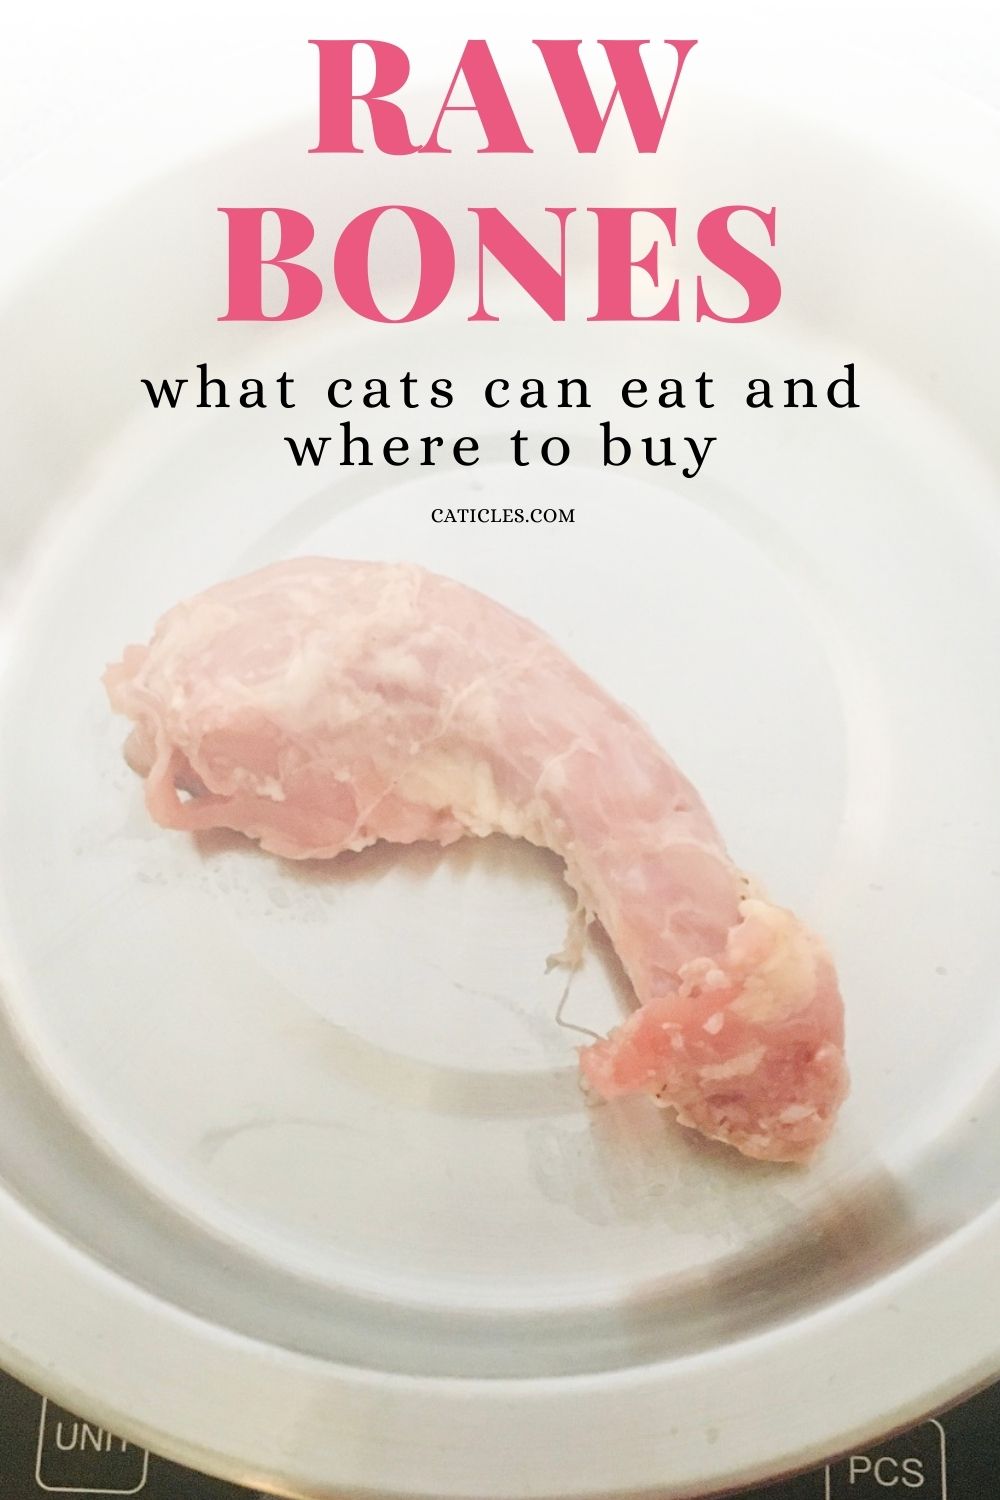 Raw Bones for Cats, Are There Bones for Cats to Chew On?